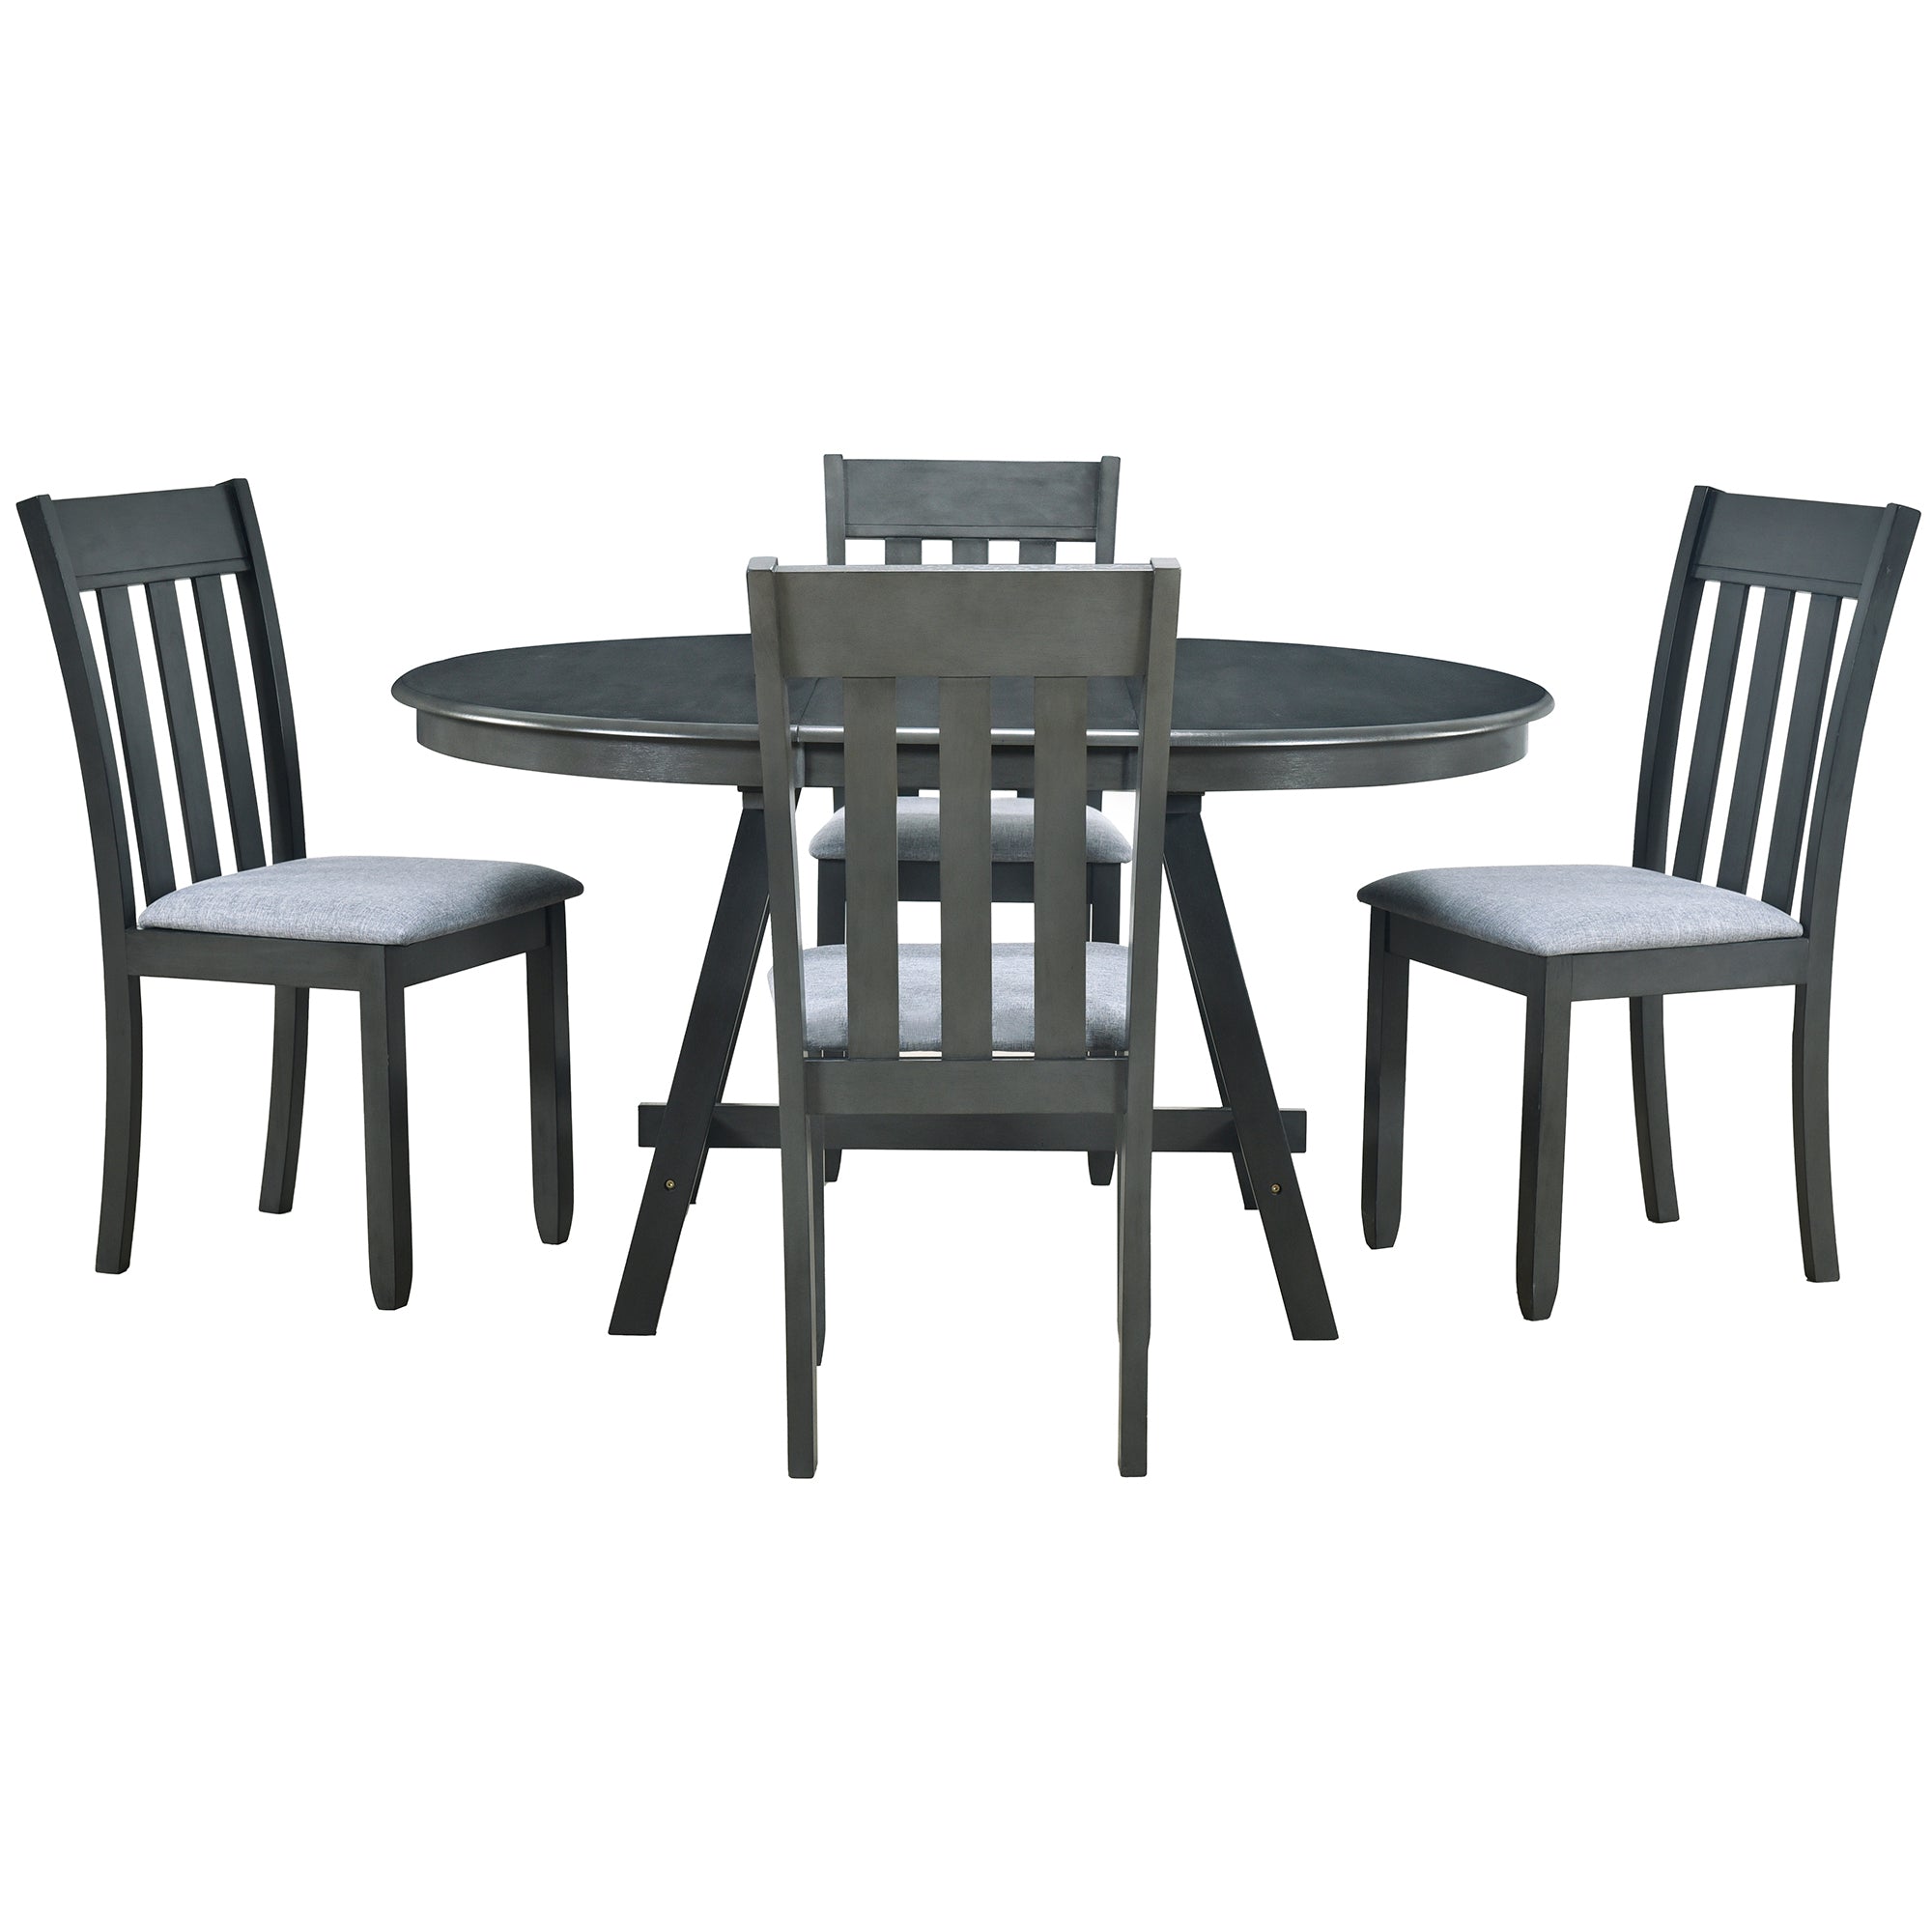 5-Piece Wood Dining Set Round Extendable Table with 4 Dining Chairs - Gray